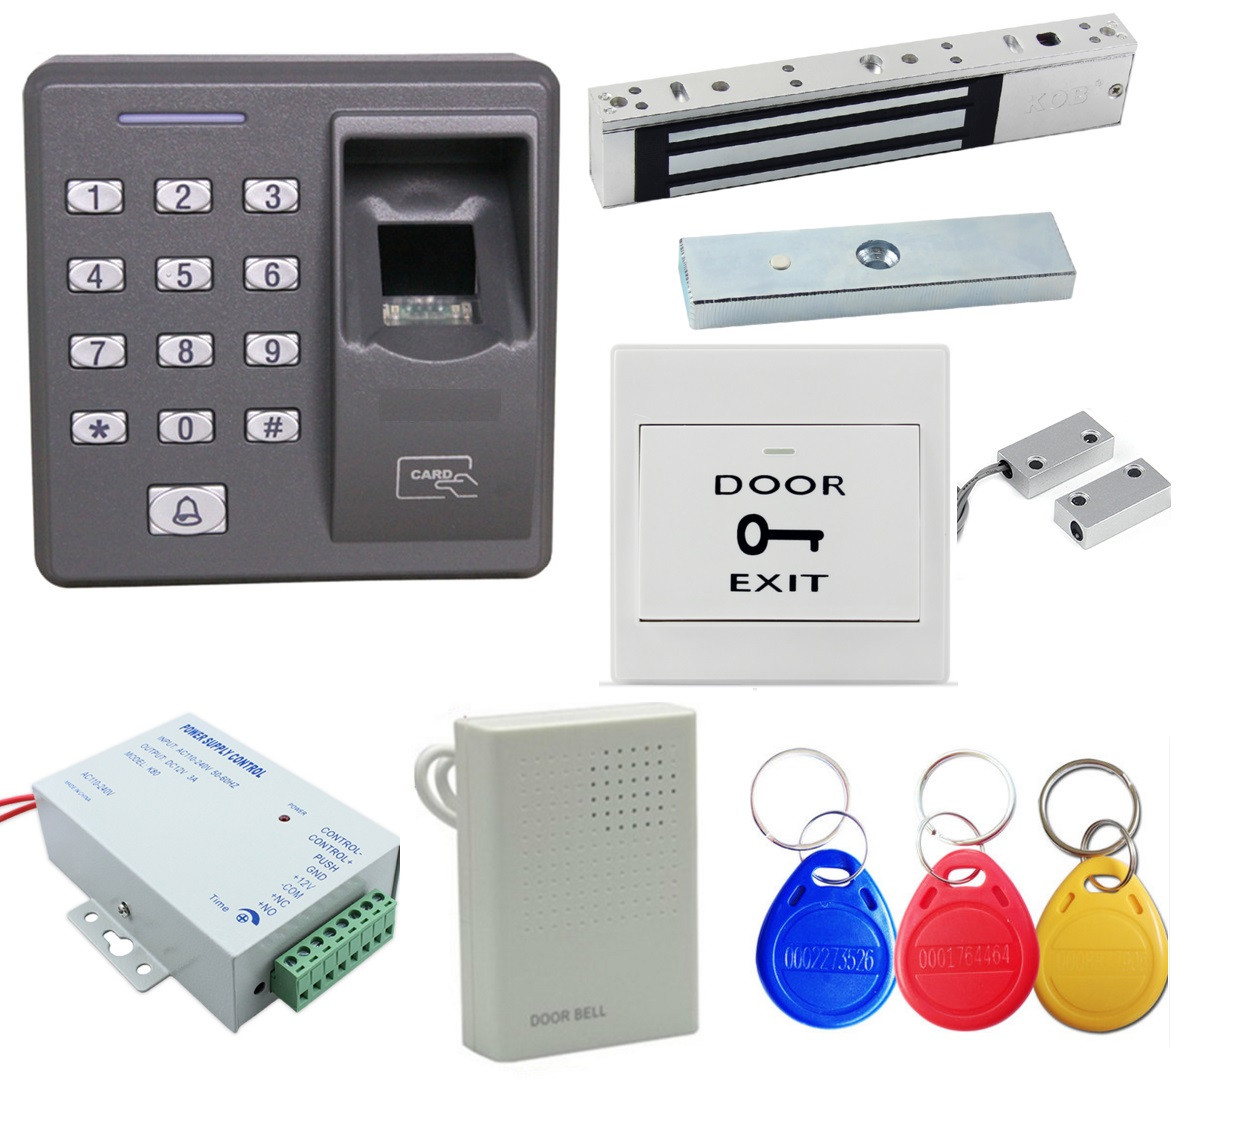 Door Home Entry Access Control Fingerprint & RFID System Kit with Magnetic lock 